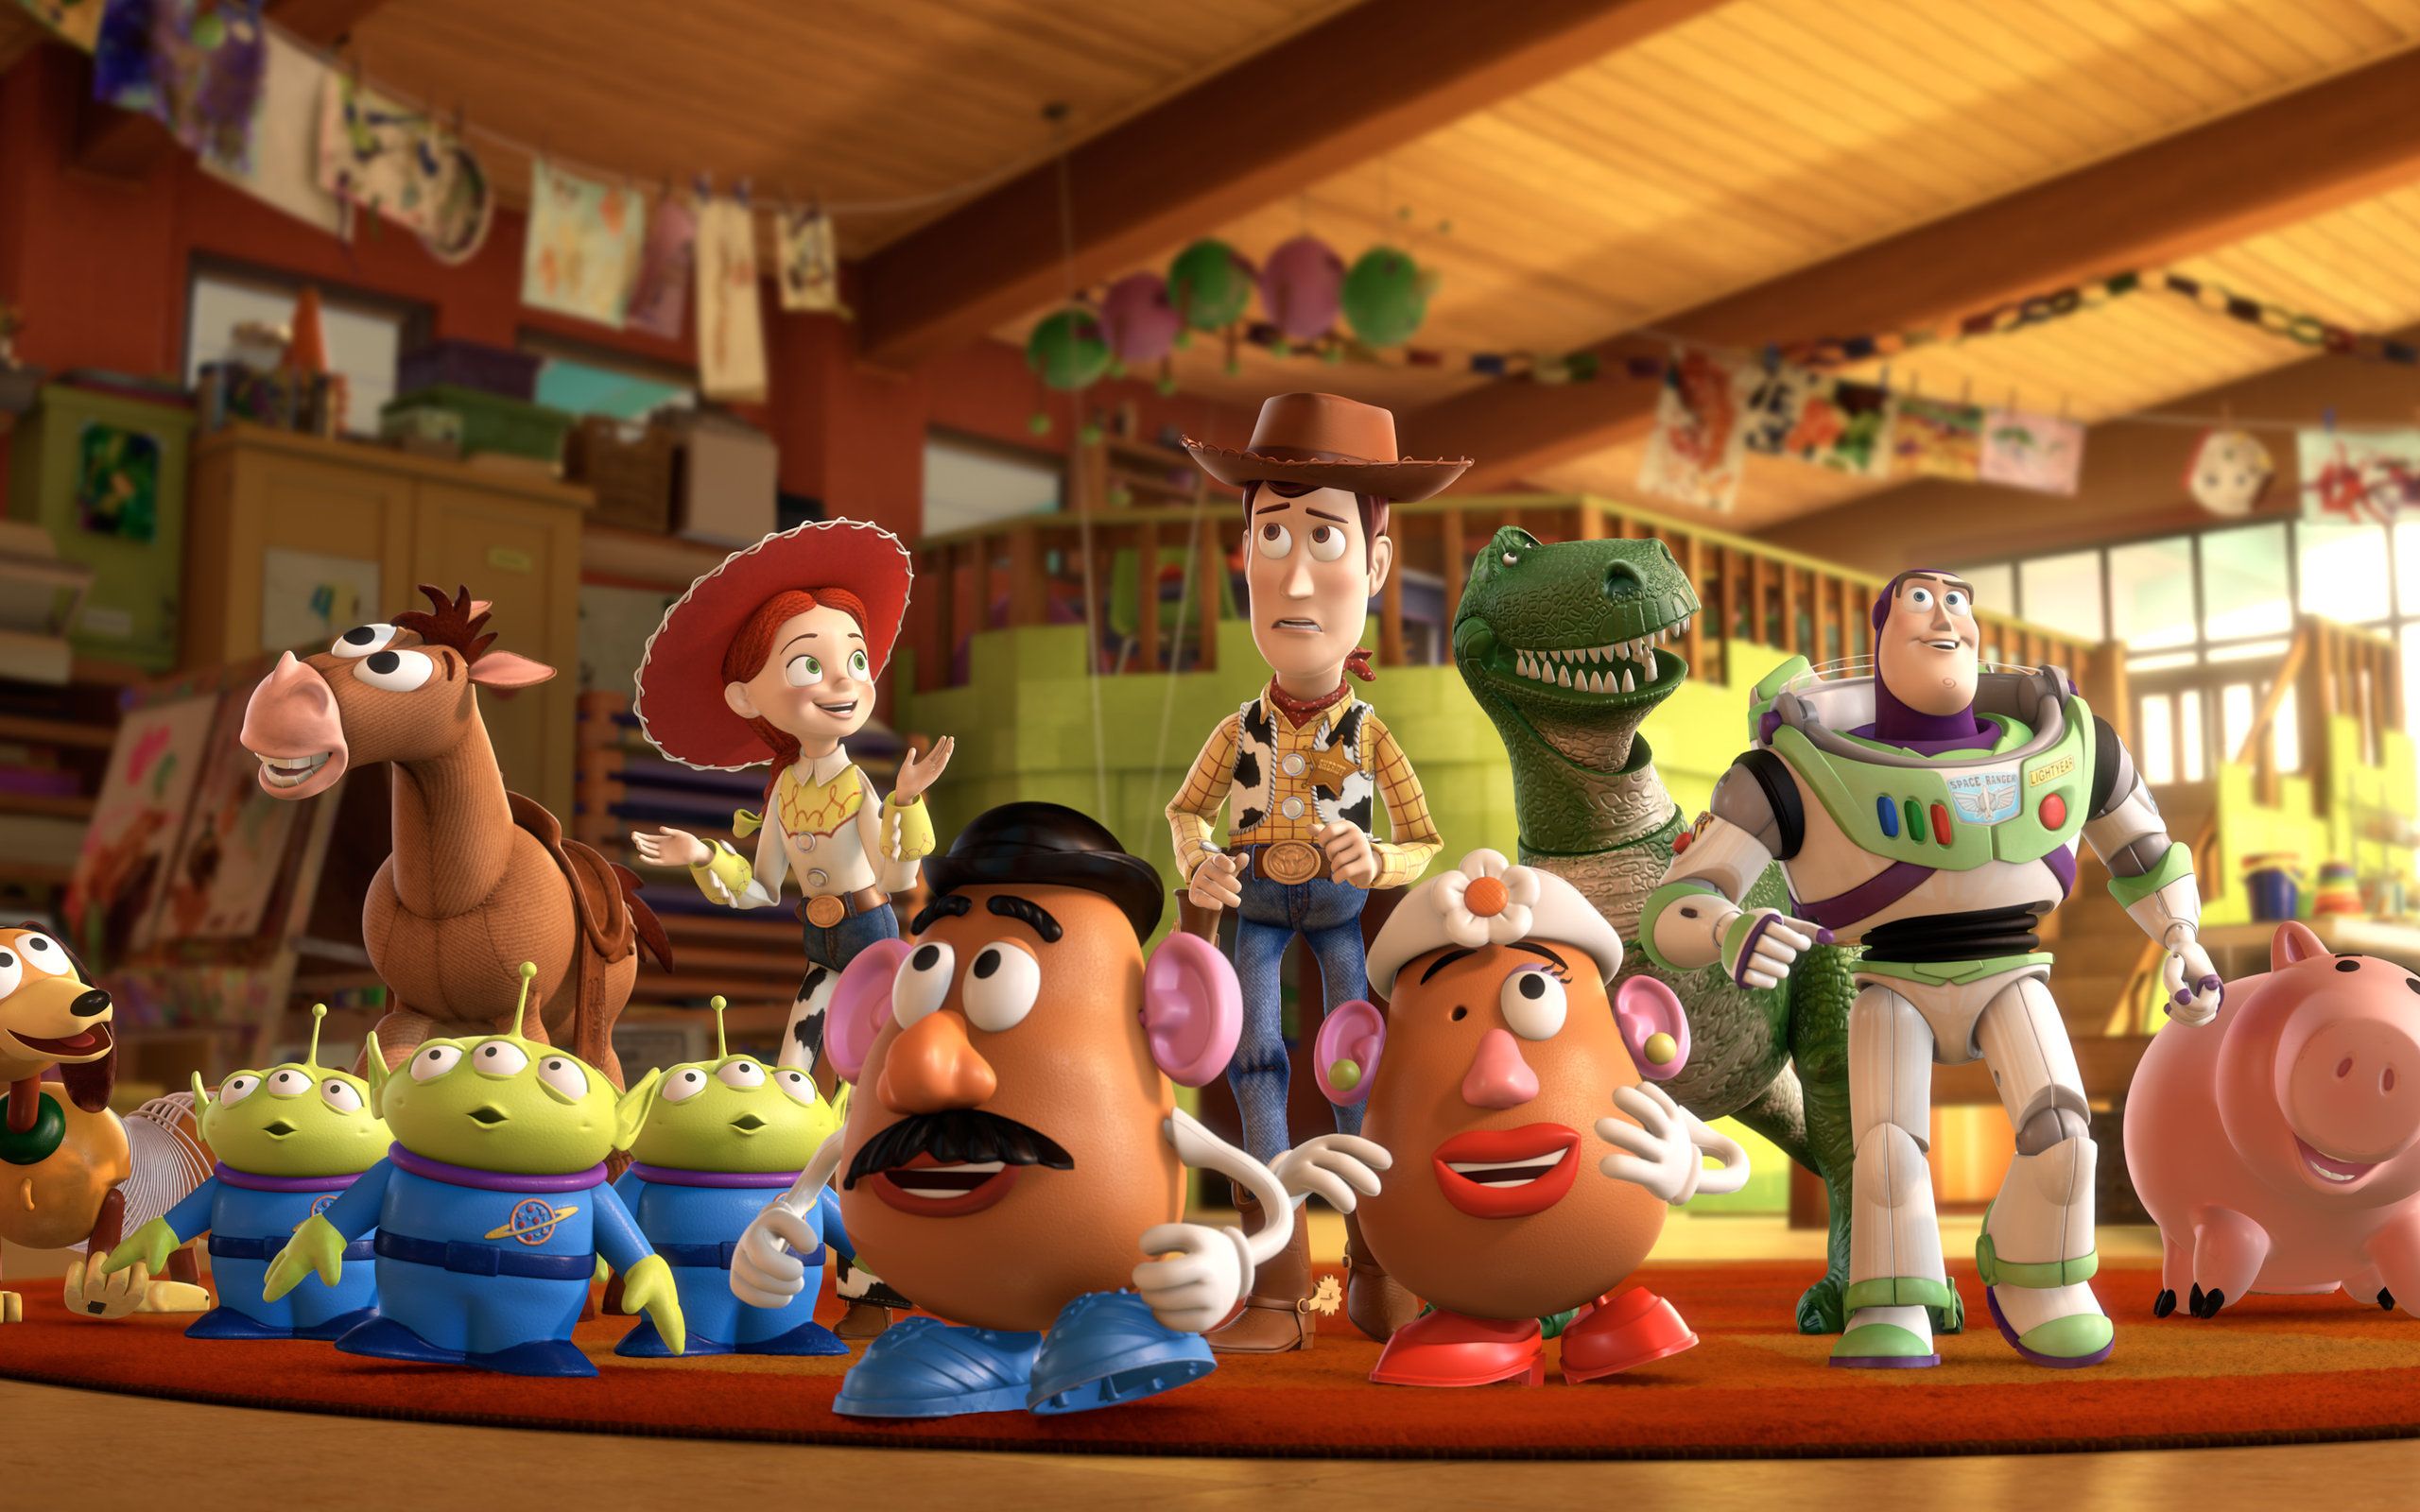 Toy Story Computer Wallpapers, Desktop Backgrounds | 2560x1600 ...